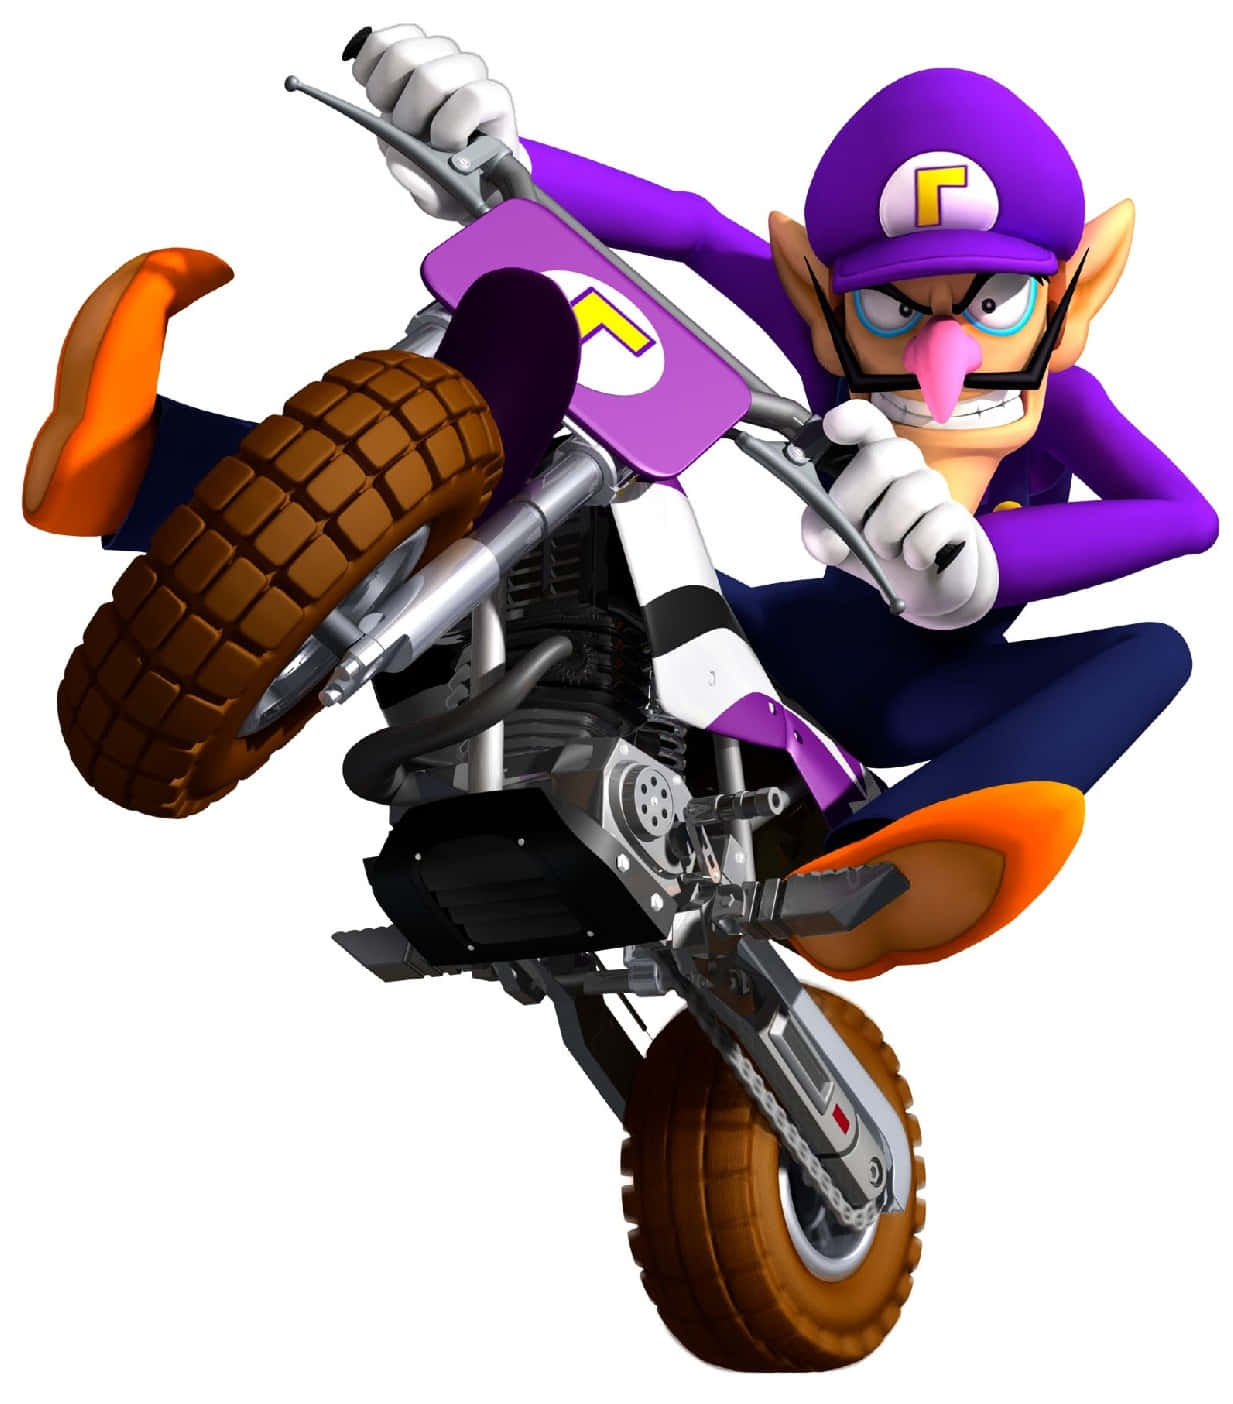 Waluigi Posing In His Iconic Style Against A Colorful Geometric Background. Background